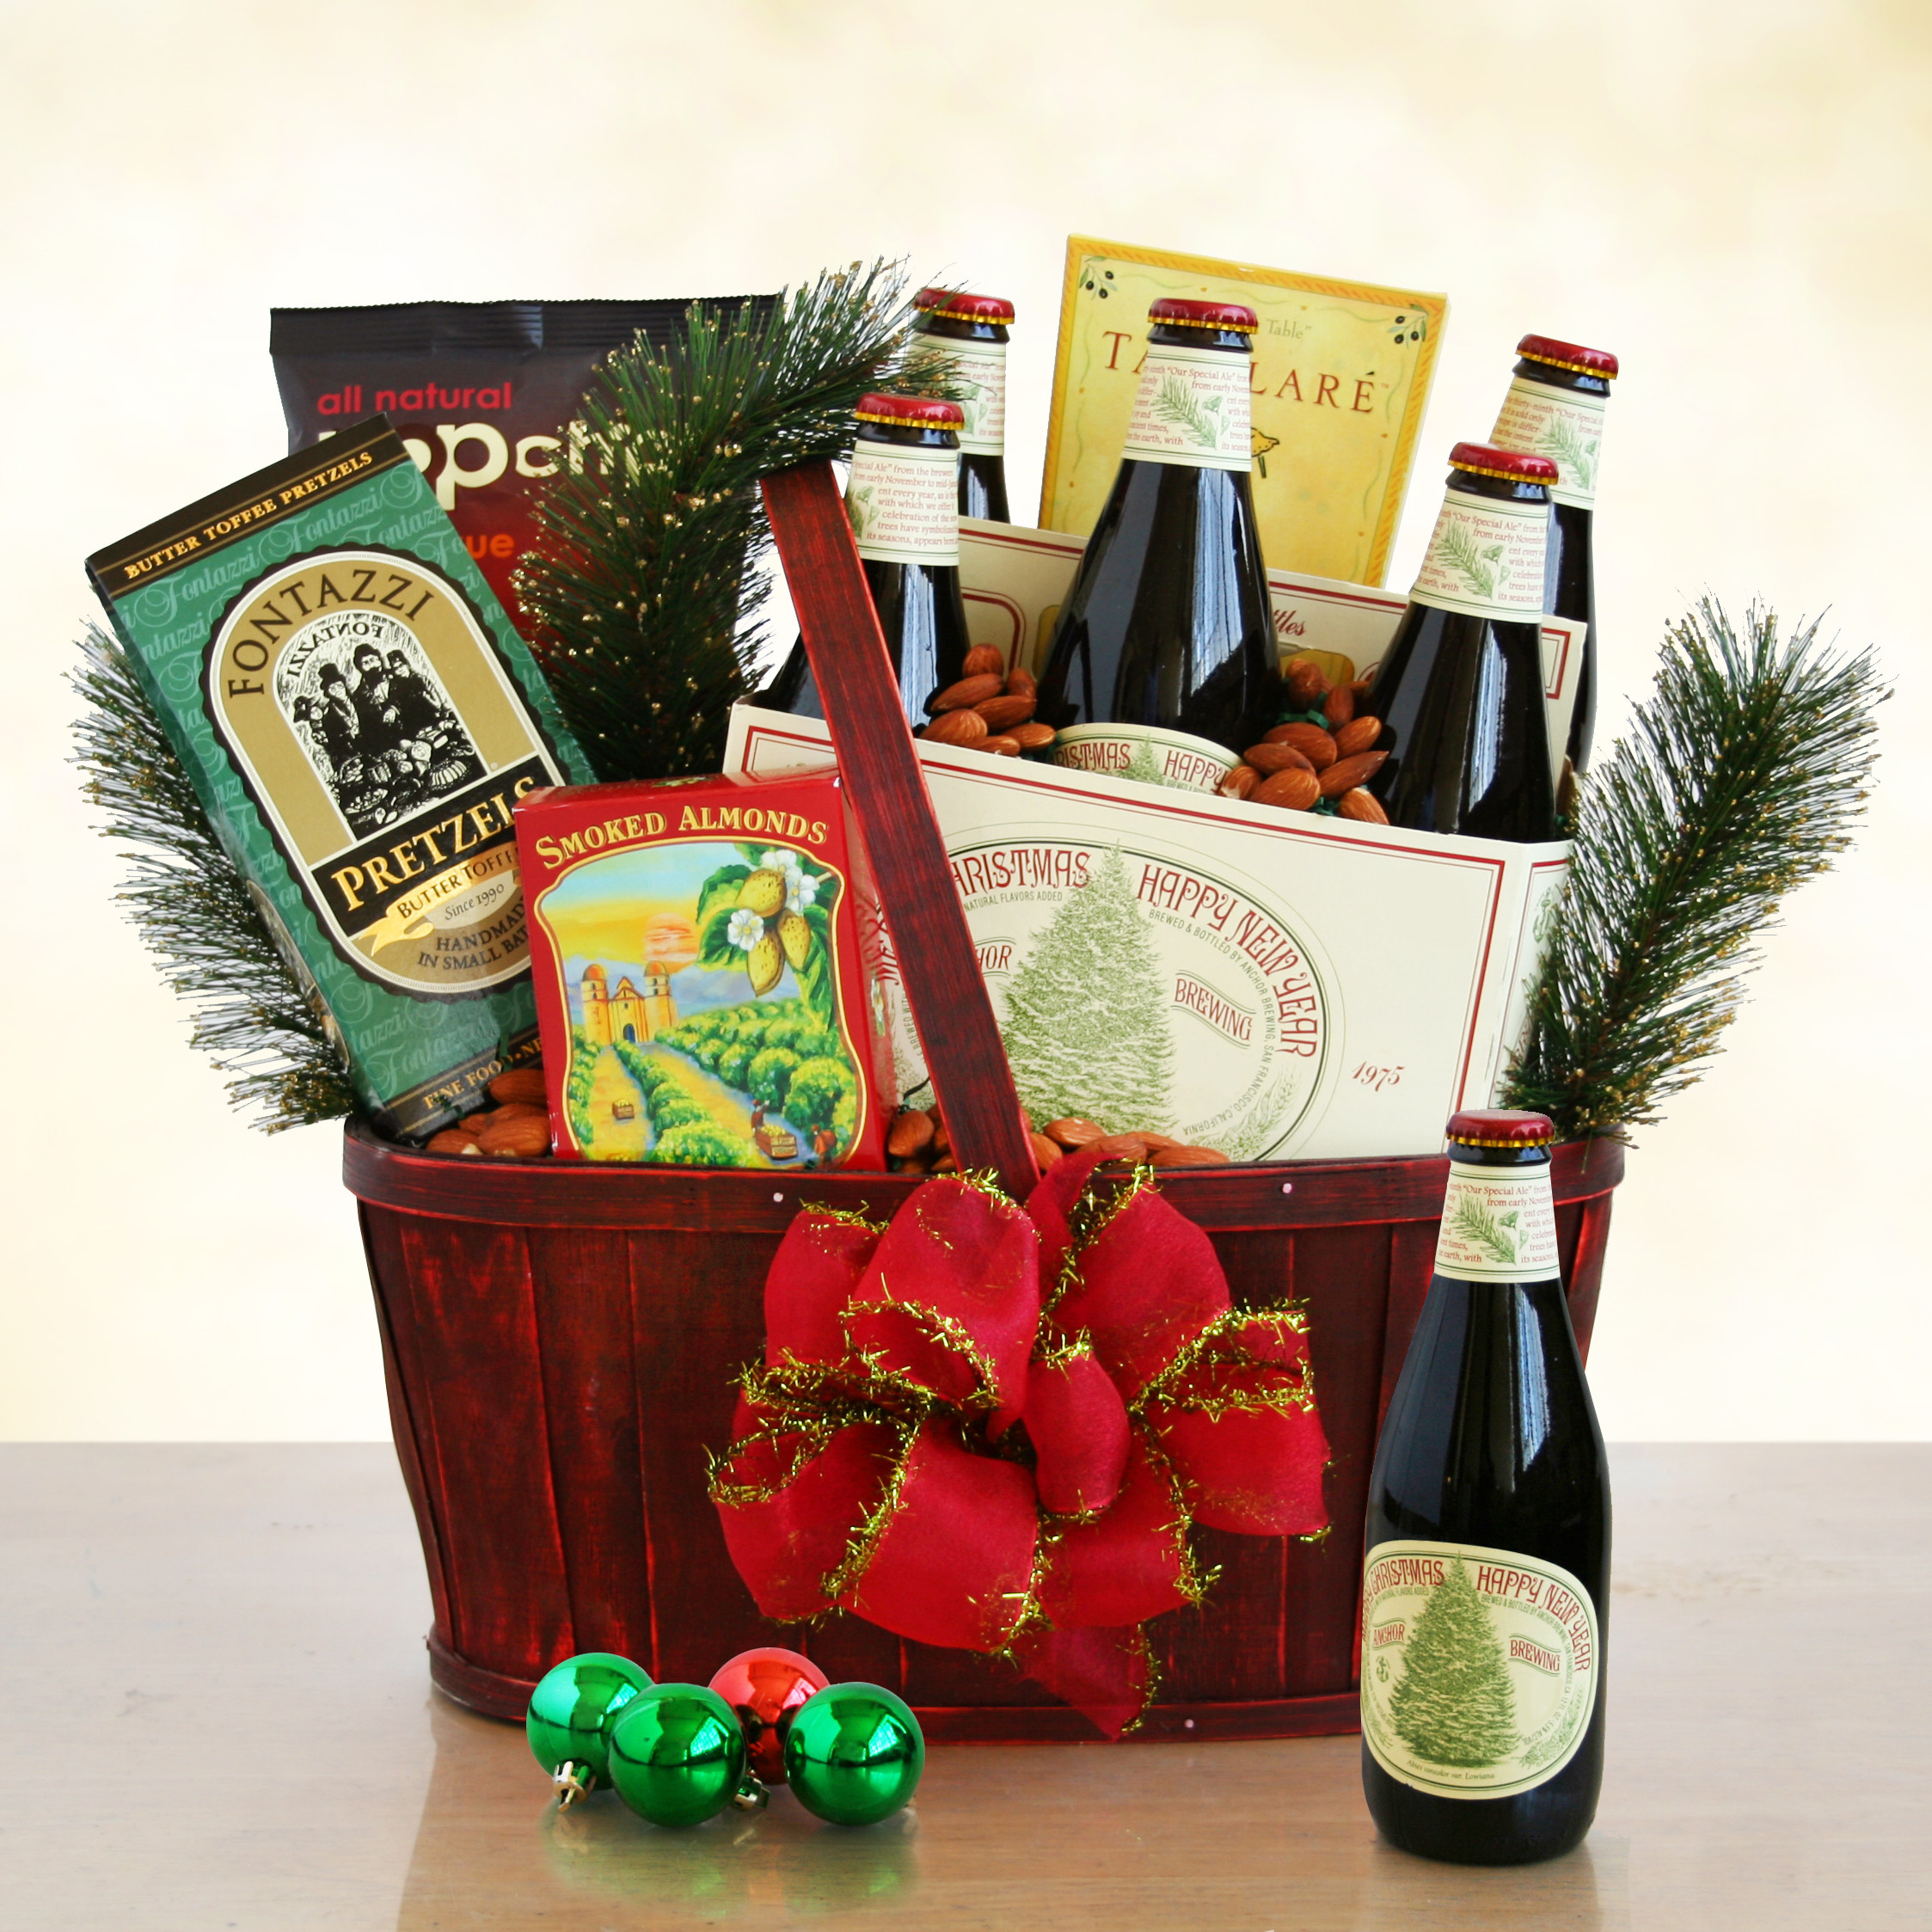 Beer Gift Basket Ideas
 Anchor Steam Christmas Ale Gift Basket – Wine Lovers